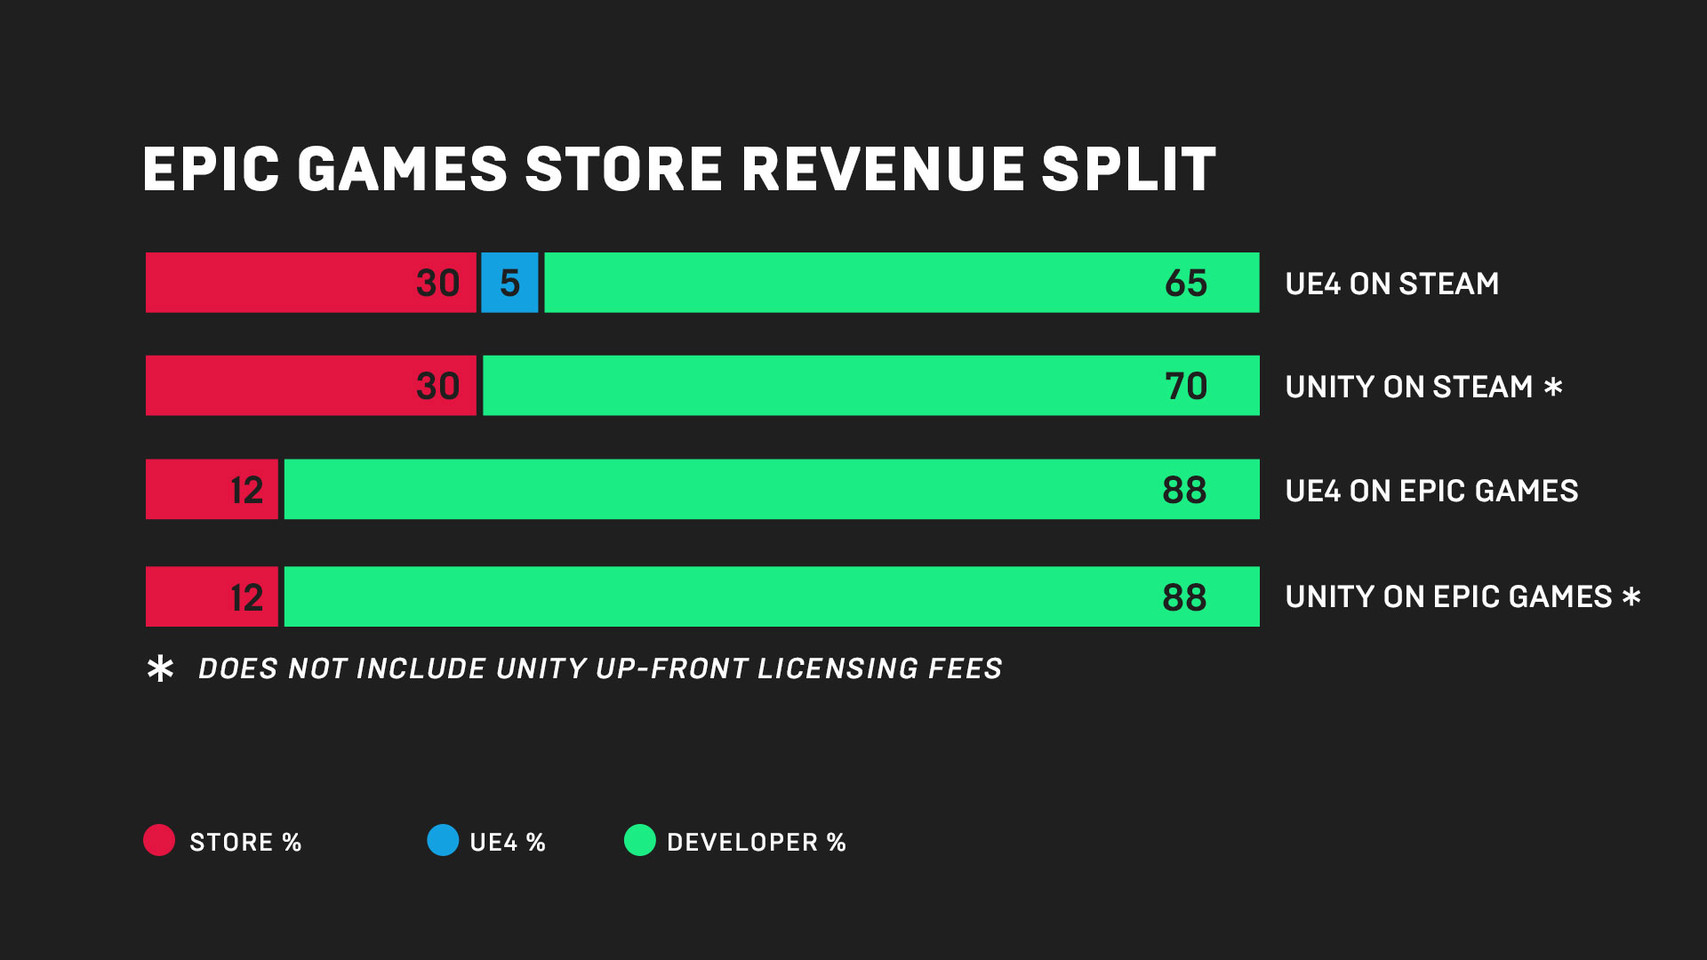 The Epic Games Store is getting an overhauled storefront and